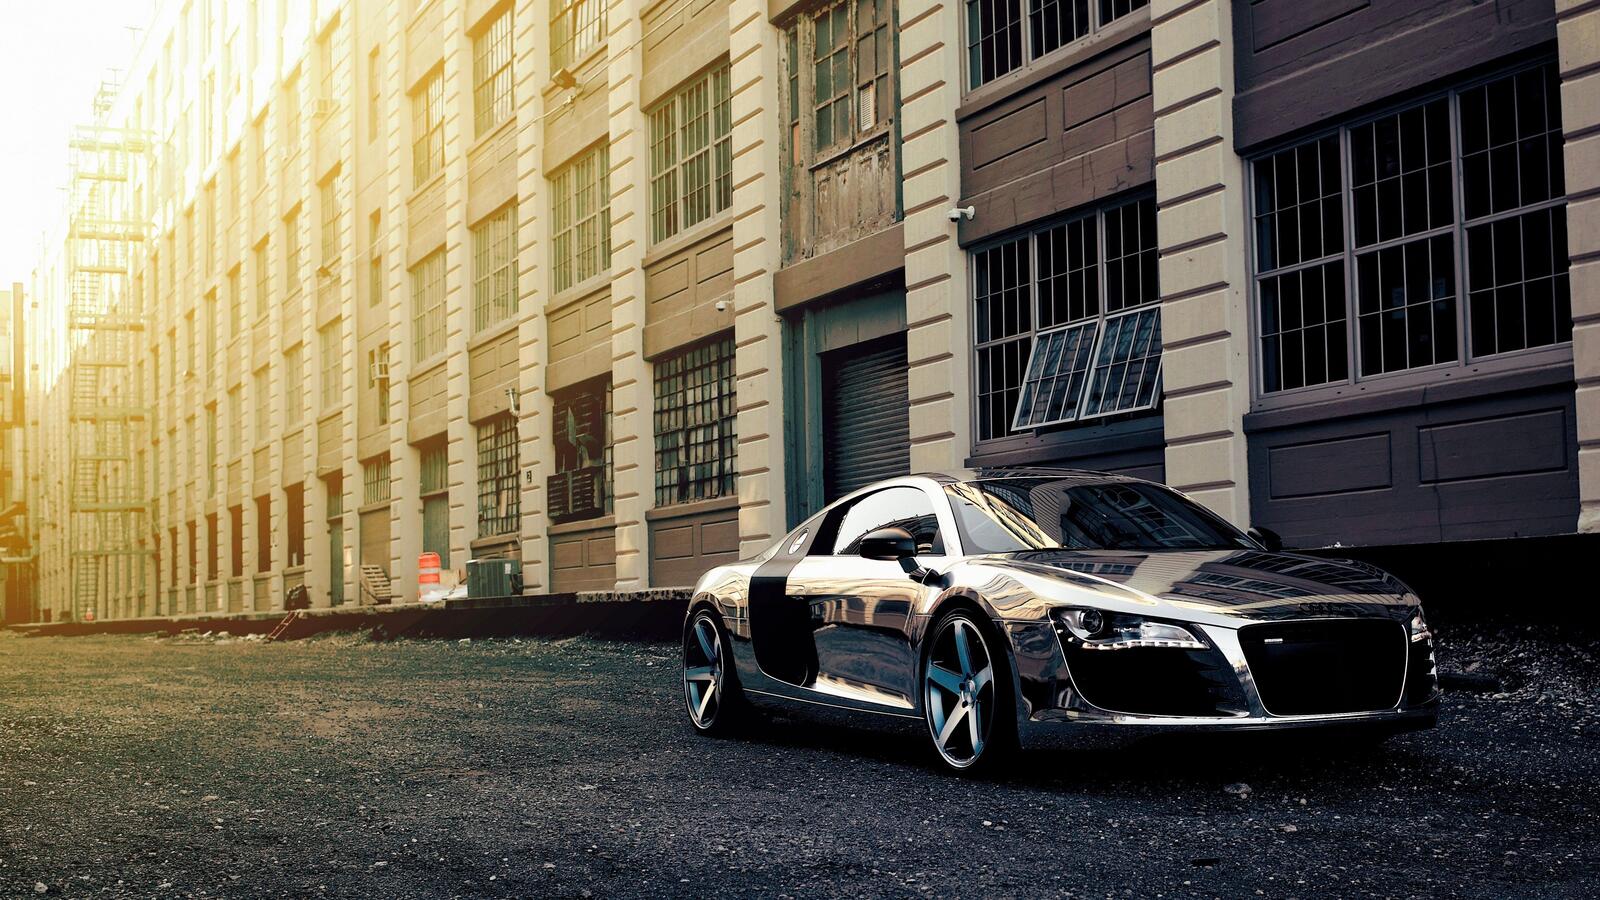 Free photo Chromed Audi R8 stands outside an old house